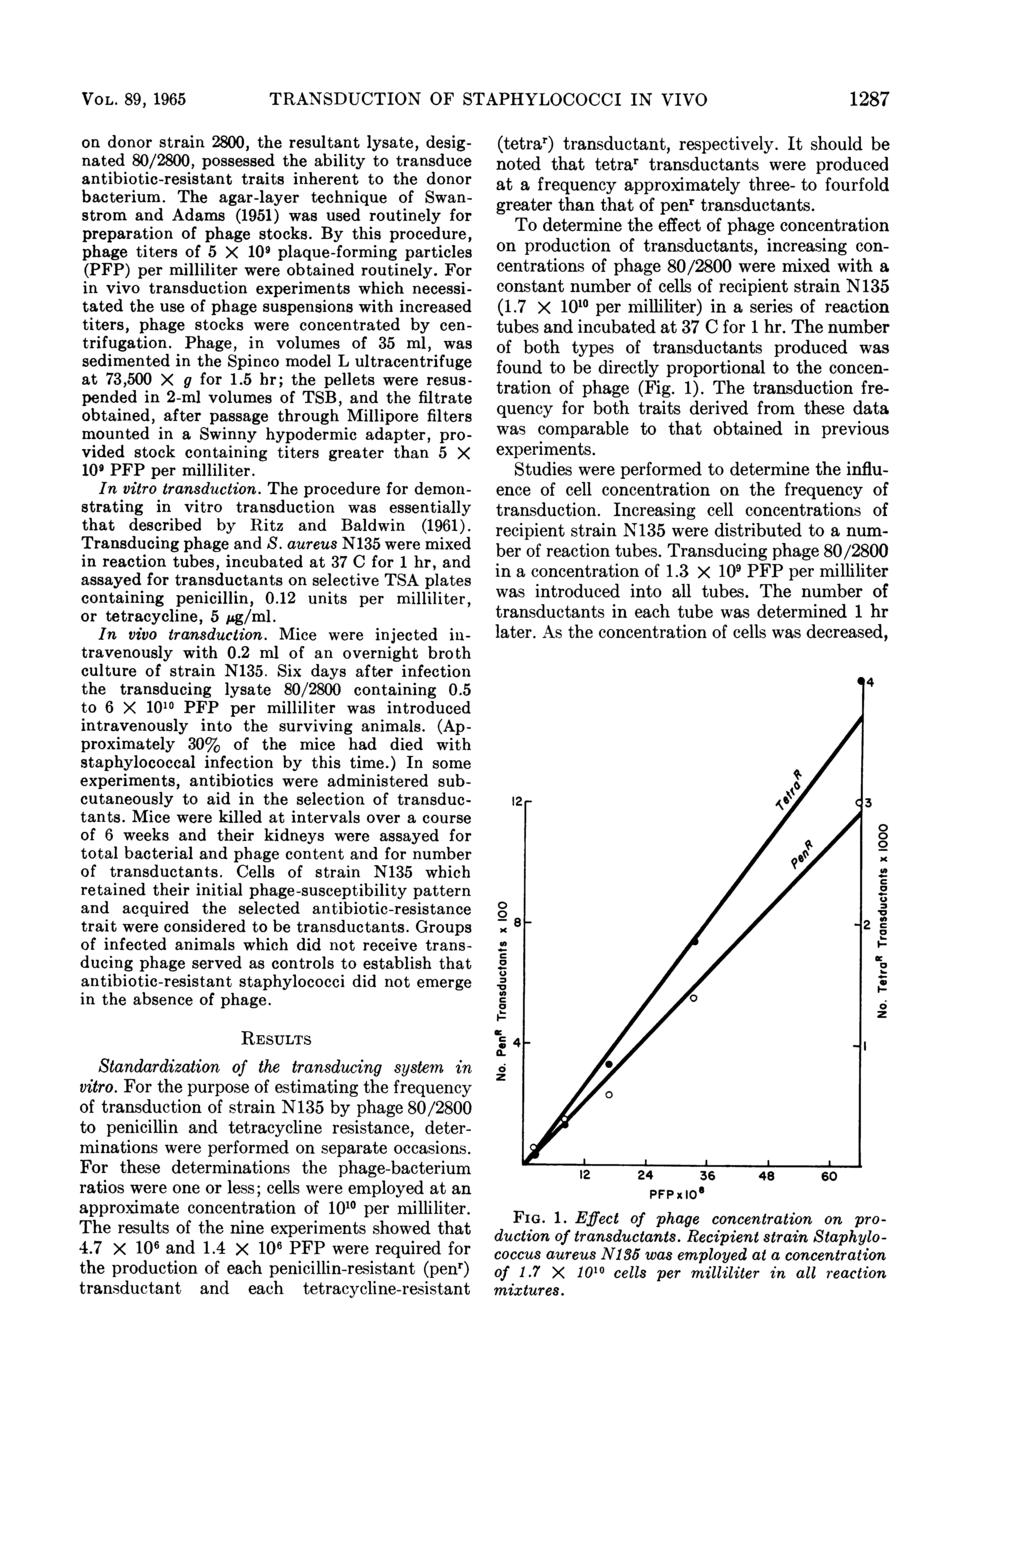 VO L. 89, 1965 TRANSDUCTION OF STAPHYLOCOCCI IN VIVO 1287 on donor strain 28, the resultant lysate, designated 8/28, possessed the ability to transduce antibiotic-resistant traits inherent to the